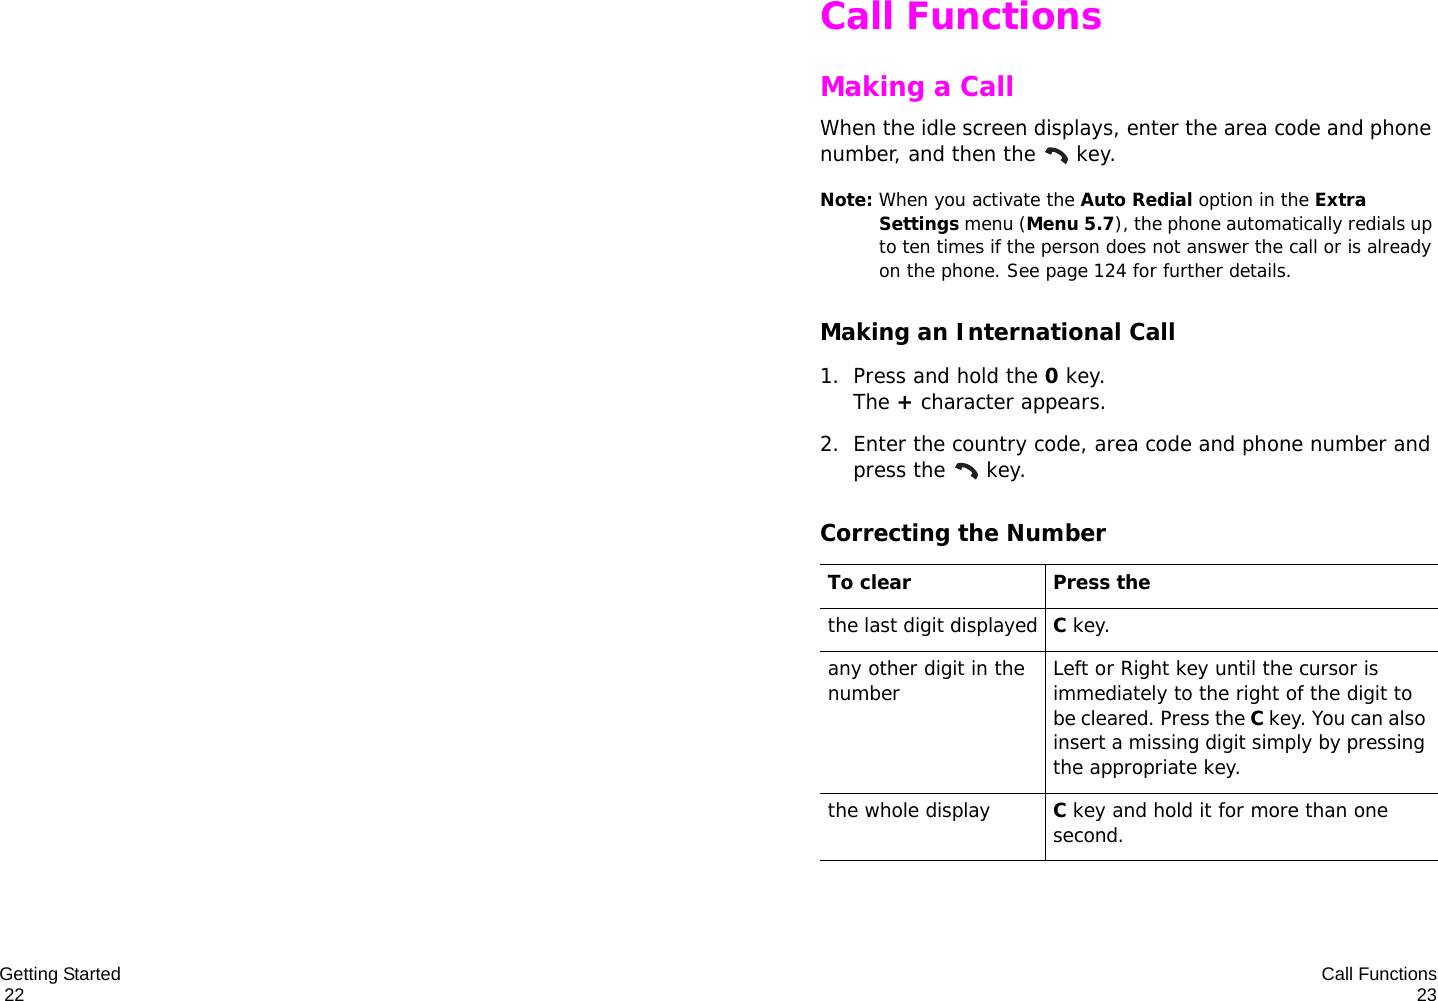 Getting Started                                                                                       22 Call Functions23Call FunctionsMaking a CallWhen the idle screen displays, enter the area code and phone number, and then the   key.Note: When you activate the Auto Redial option in the Extra Settings menu (Menu 5.7), the phone automatically redials up to ten times if the person does not answer the call or is already on the phone. See page 124 for further details.Making an International Call1. Press and hold the 0 key.The + character appears.2. Enter the country code, area code and phone number and press the   key.Correcting the NumberTo clear Press thethe last digit displayedC key. any other digit in the number Left or Right key until the cursor is immediately to the right of the digit to be cleared. Press the C key. You can also insert a missing digit simply by pressing the appropriate key.the whole displayC key and hold it for more than one second.